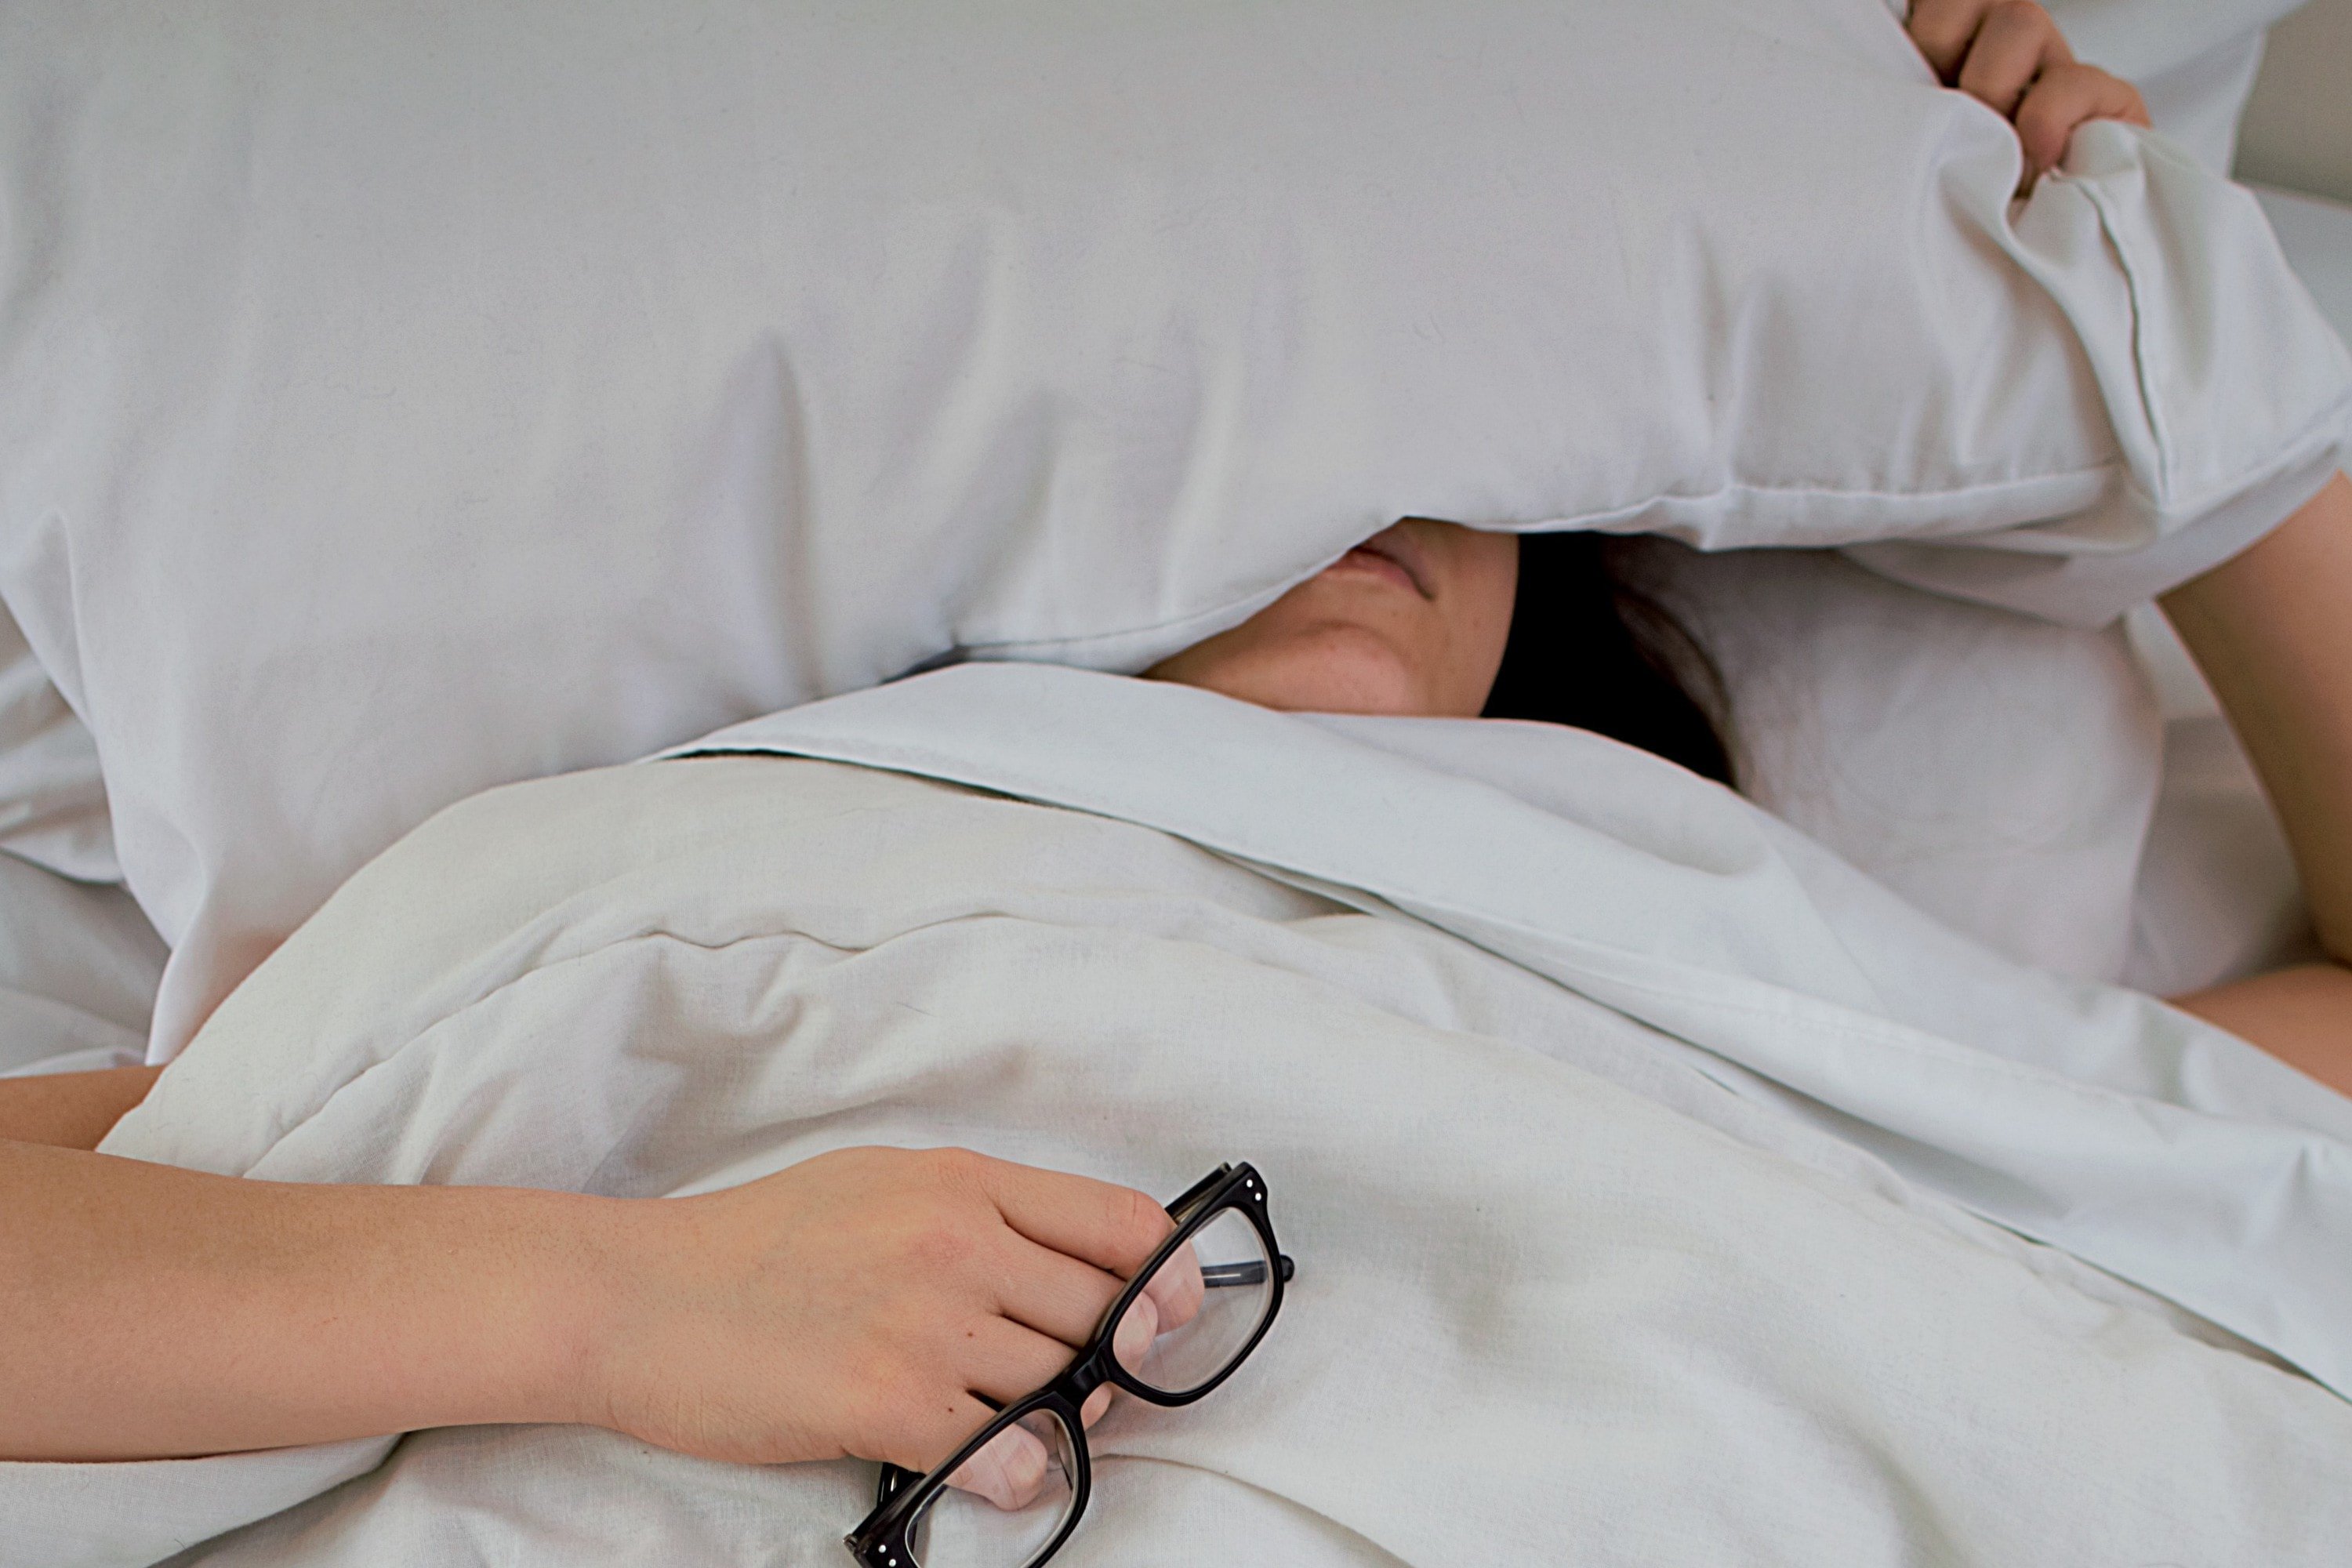 Woman asleep in bed, her face is under the pillow